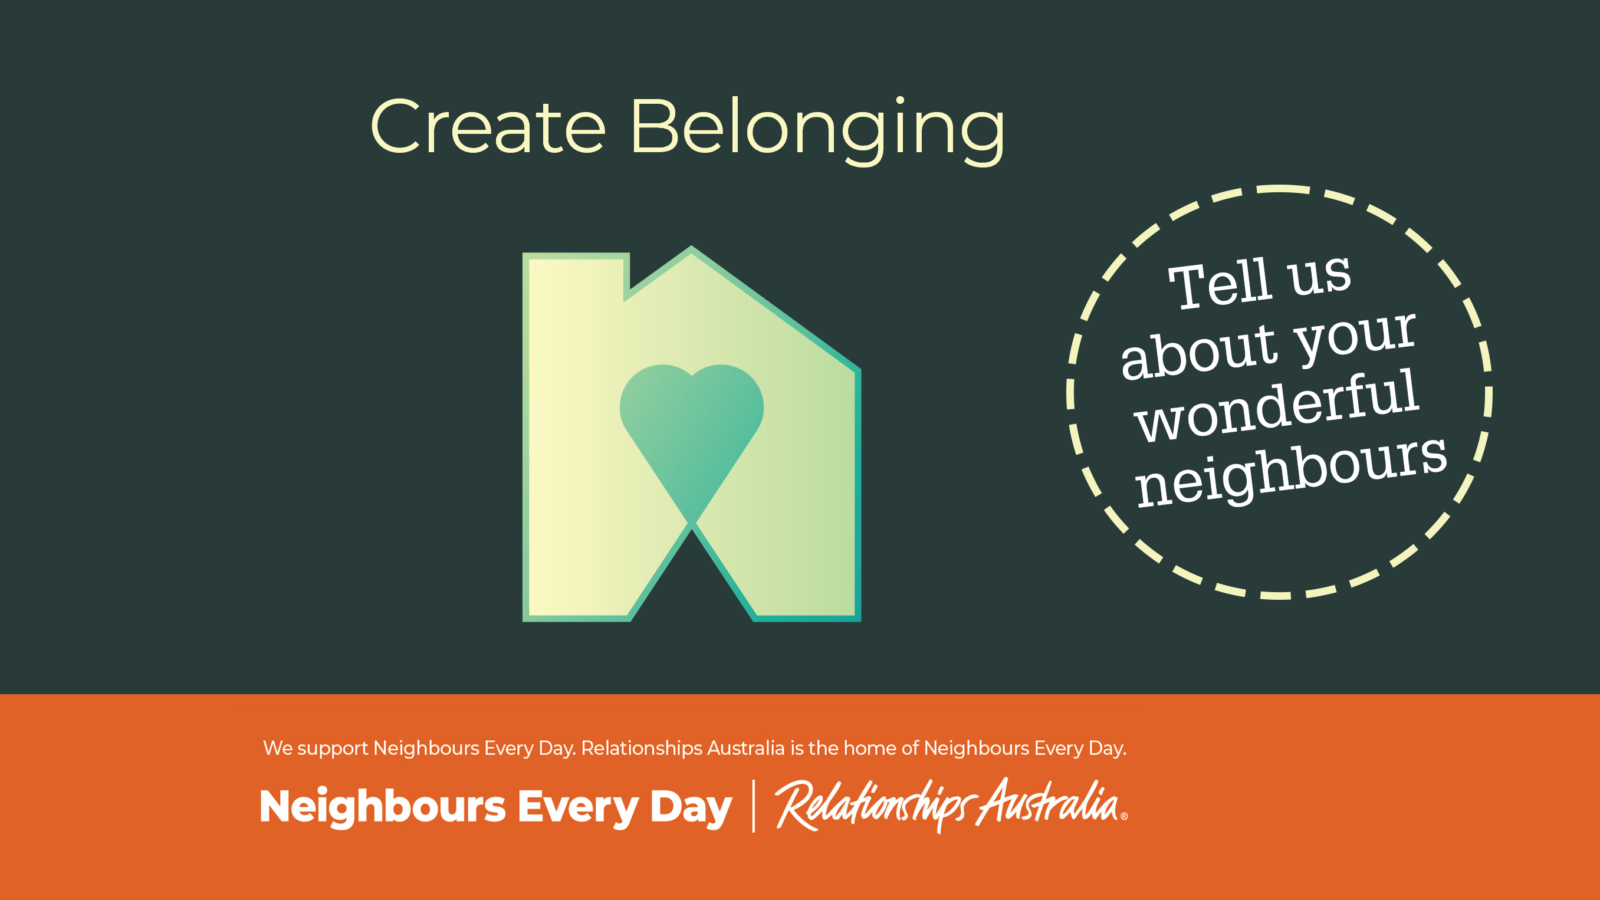 Create Belonging Tell us about your wonderful neighbours. Relationships Australia is the home of Neighbours Every Day